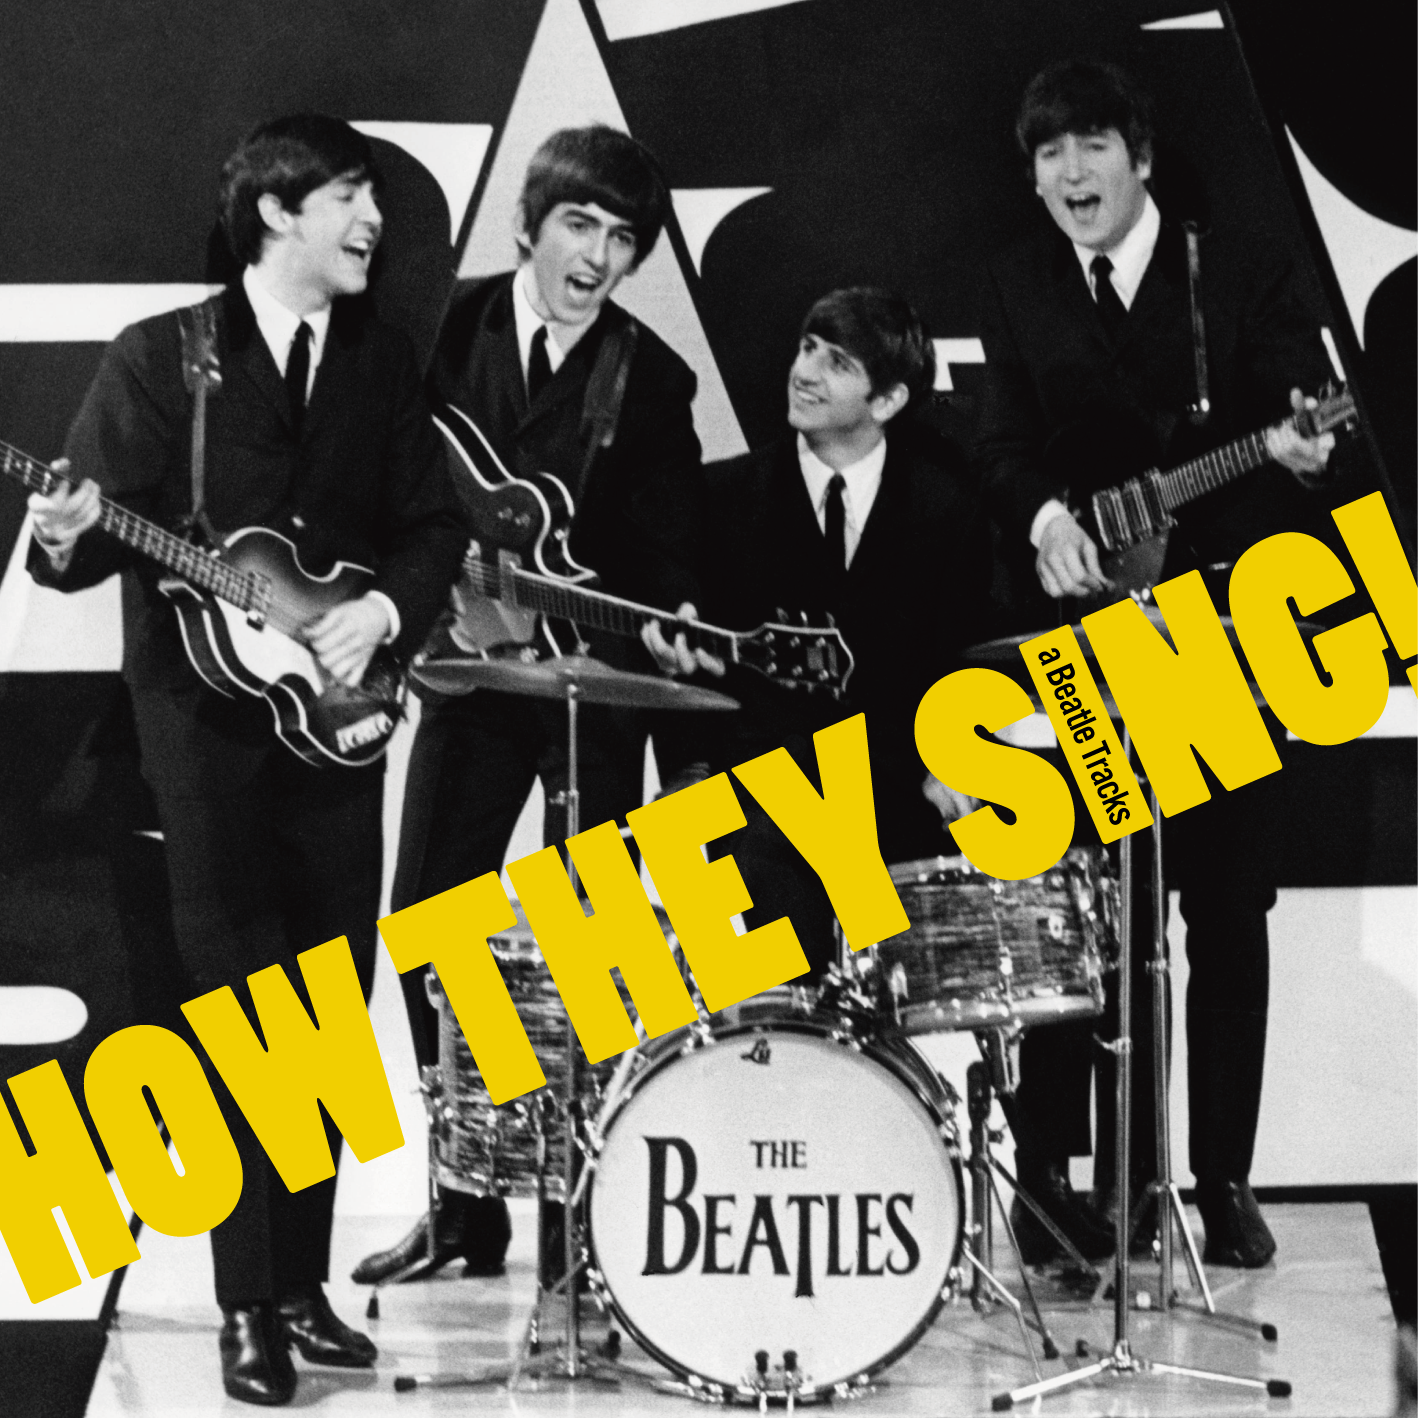 THE BEATLES / HOW THEY SING!(a Beatle Tracks)<br />
このコーラスワークを聴け!